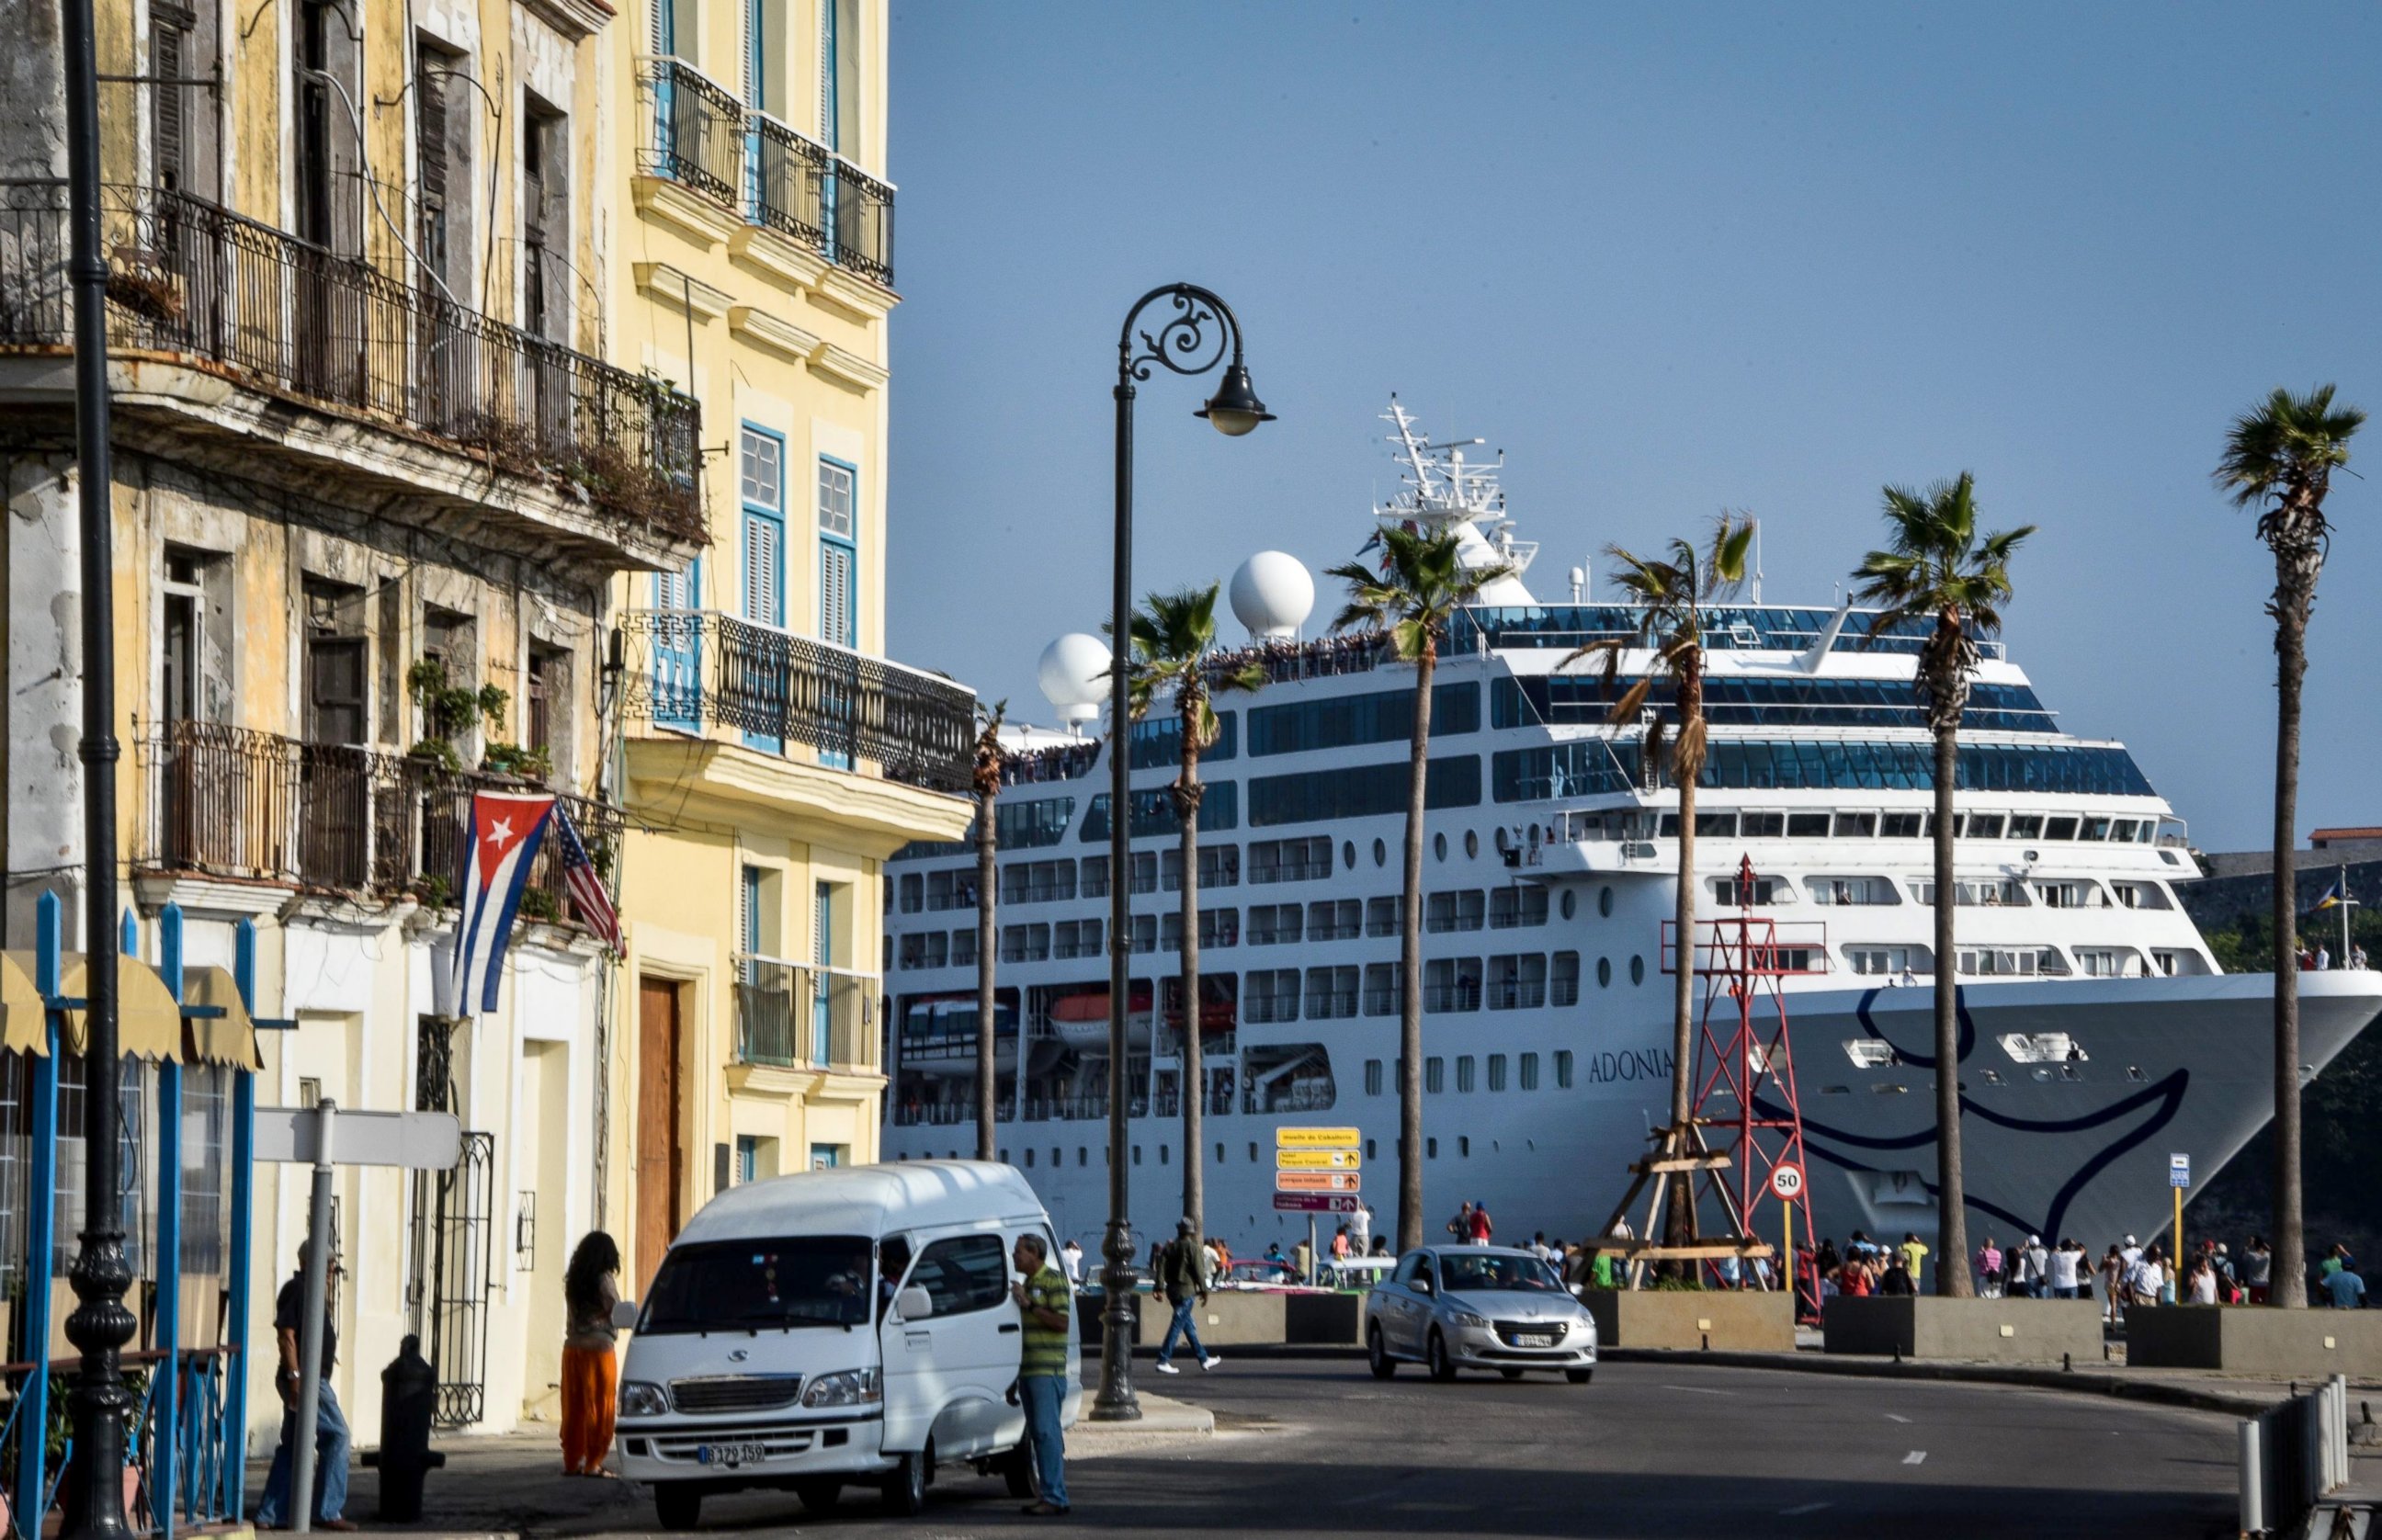 PHOTO: The first US-to-Cuba cruise ship to arrive in the island nation in decades glides into the port of Havana, May 2, 2016.  